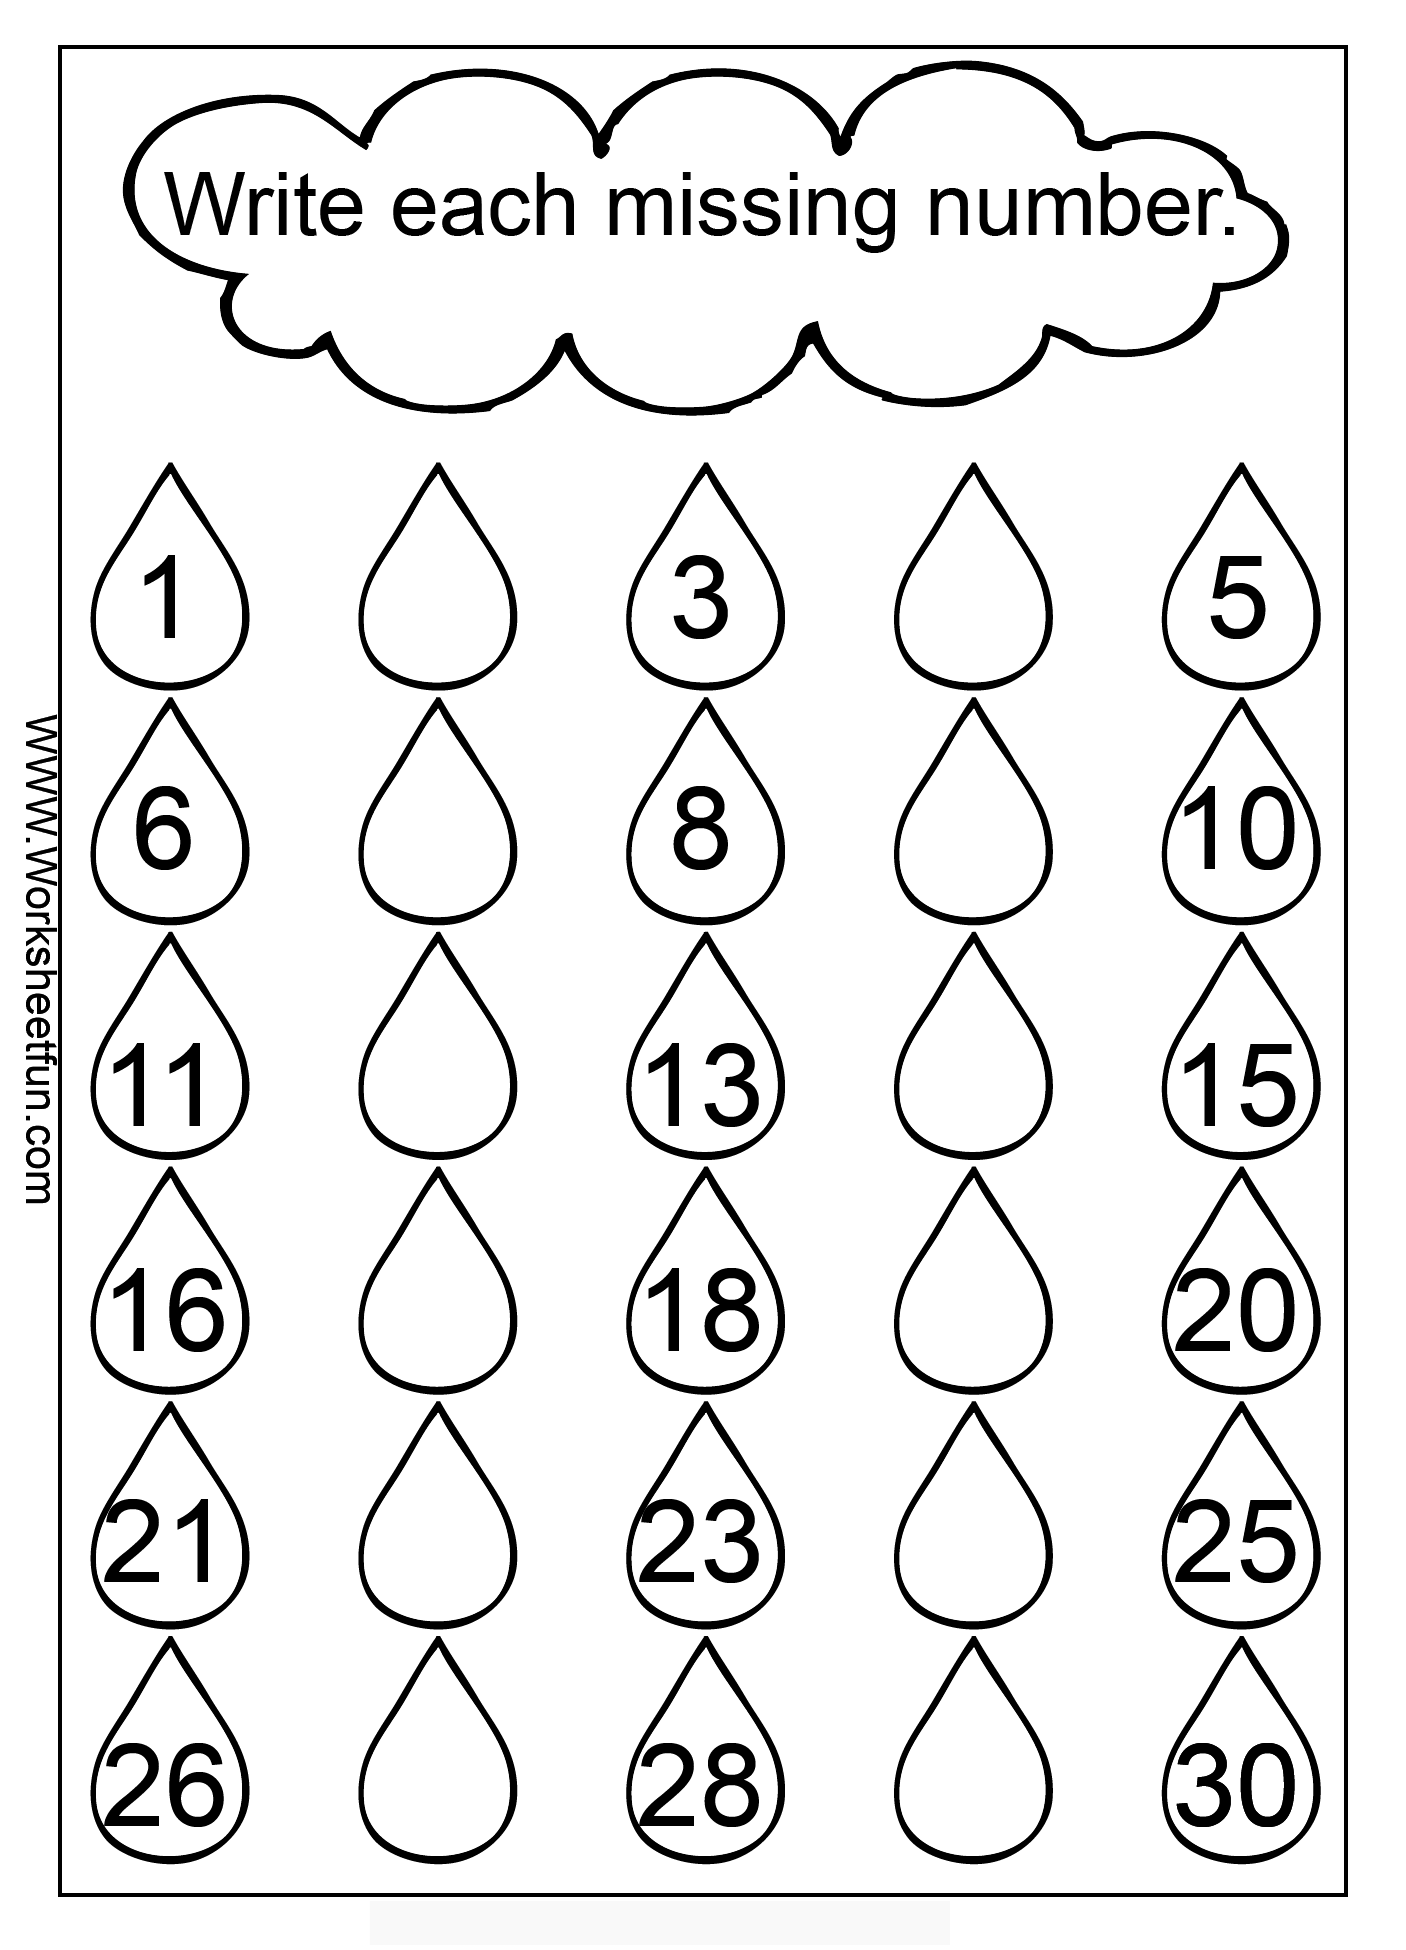 Counting Missing Numbers Worksheets